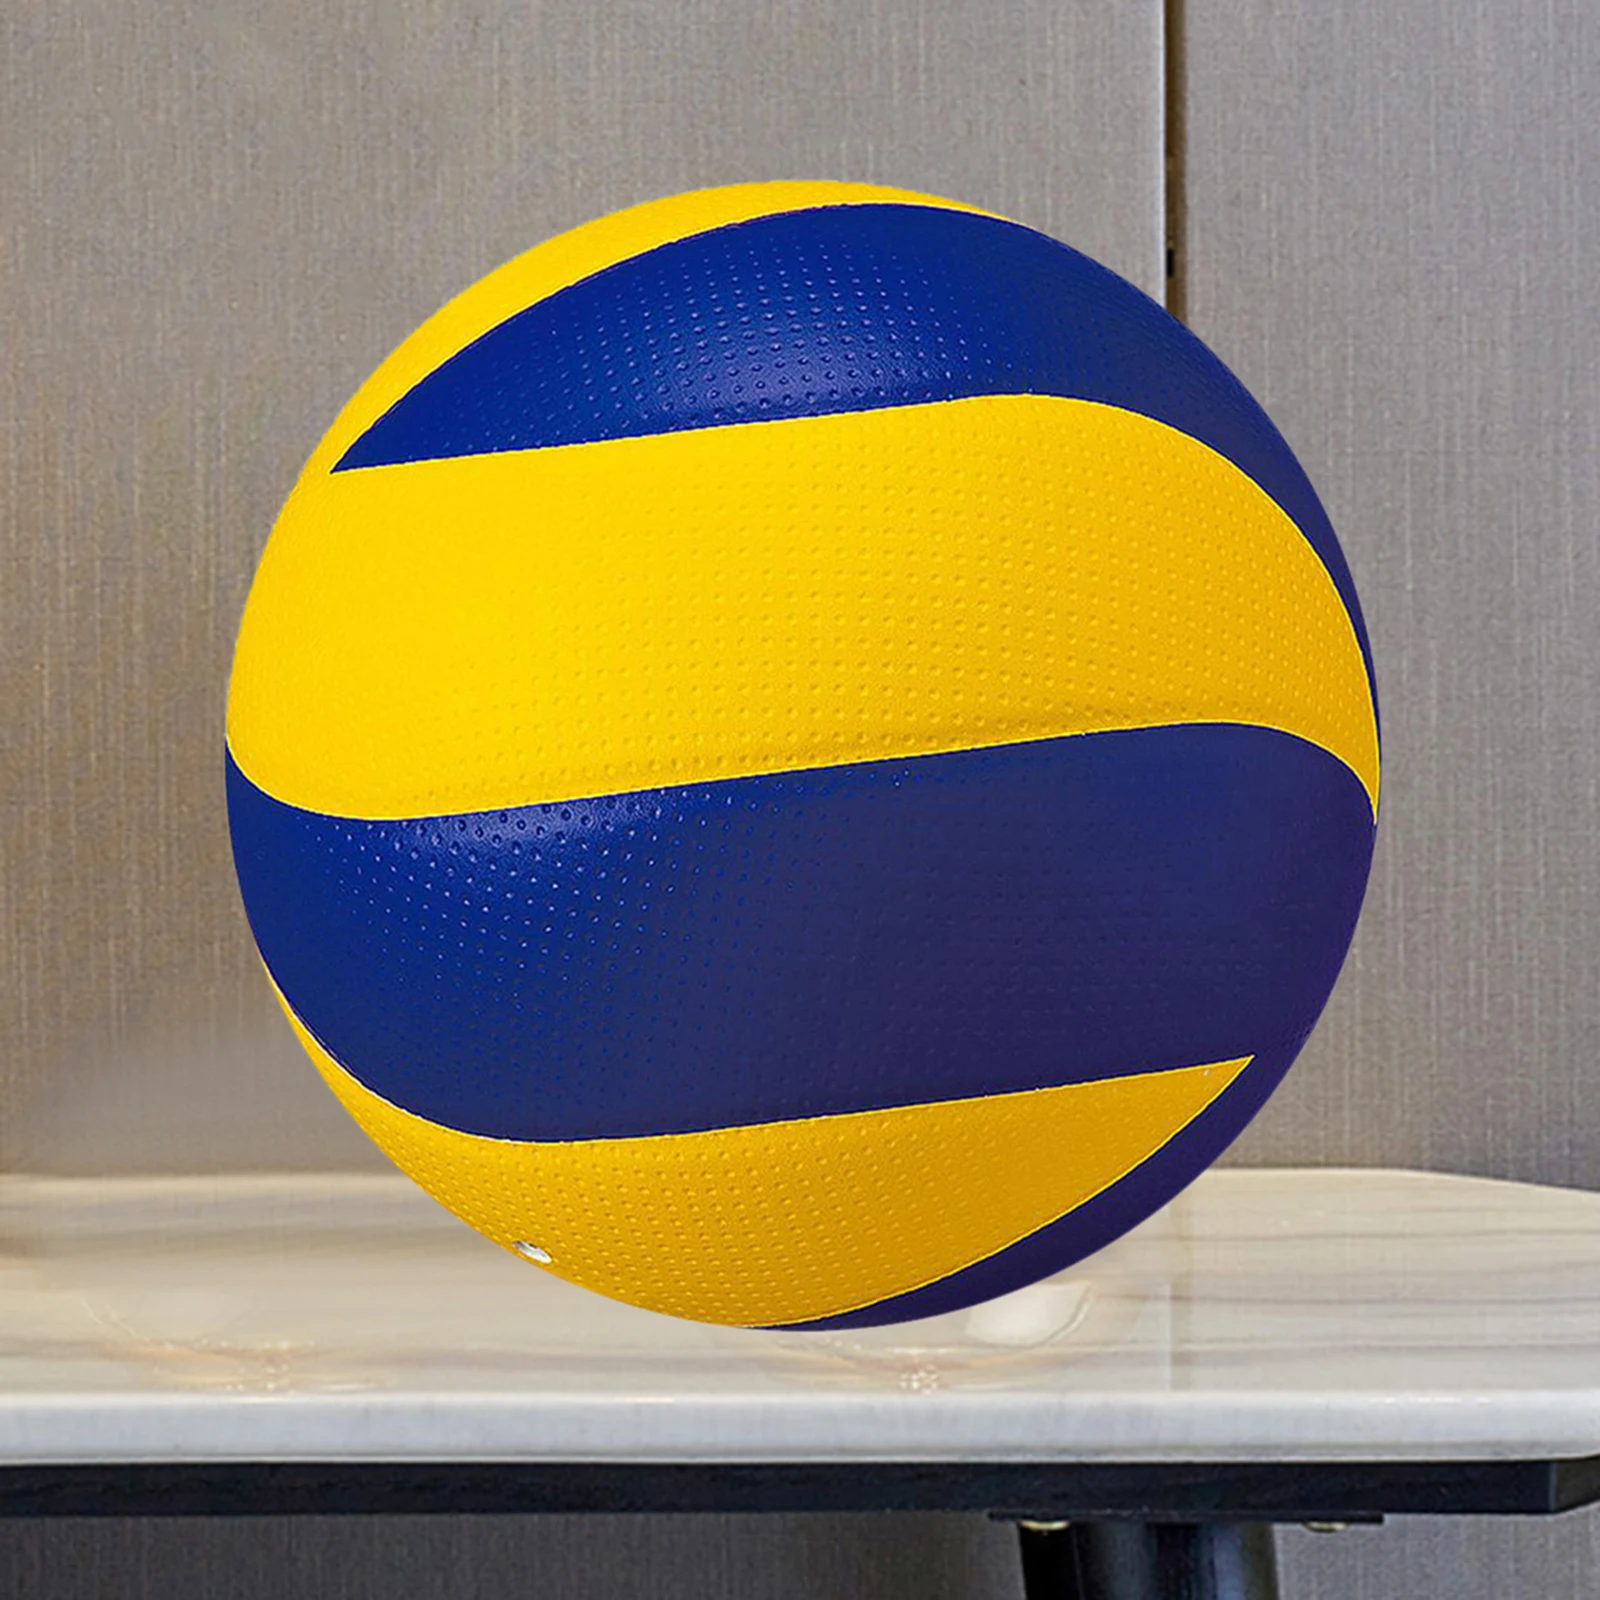 Professional Size 5 Beach Volleyball Indoor-outdoor Ball for Kids